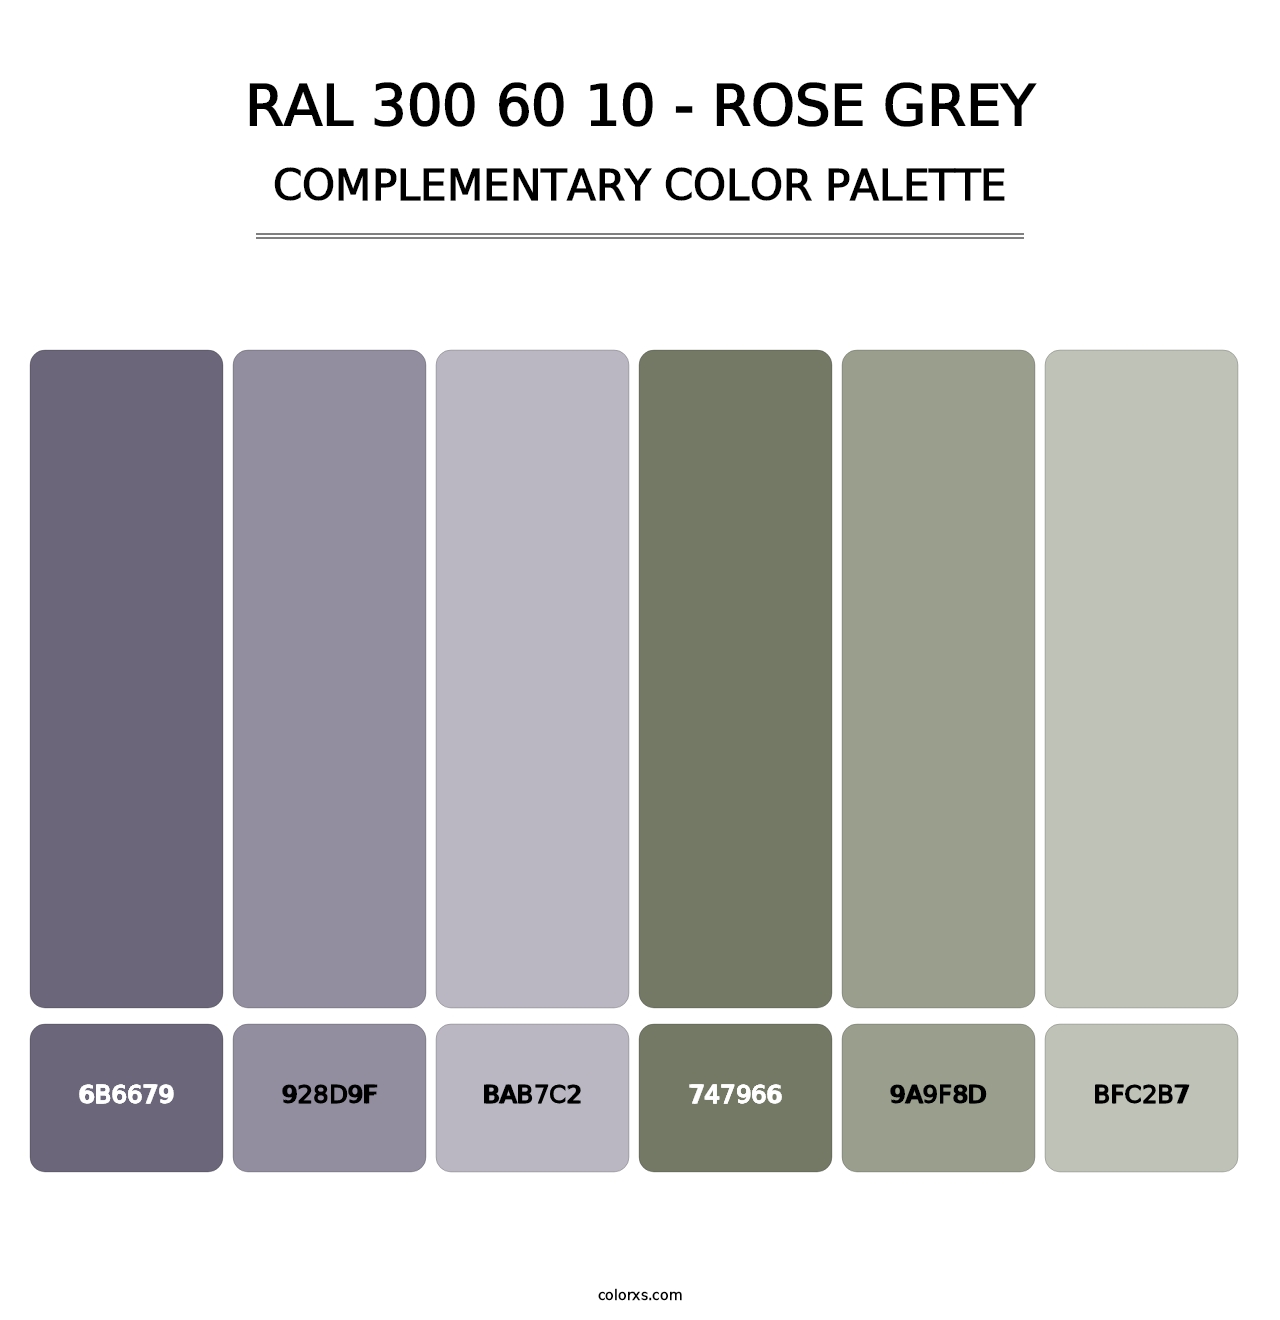 RAL 300 60 10 - Rose Grey - Complementary Color Palette